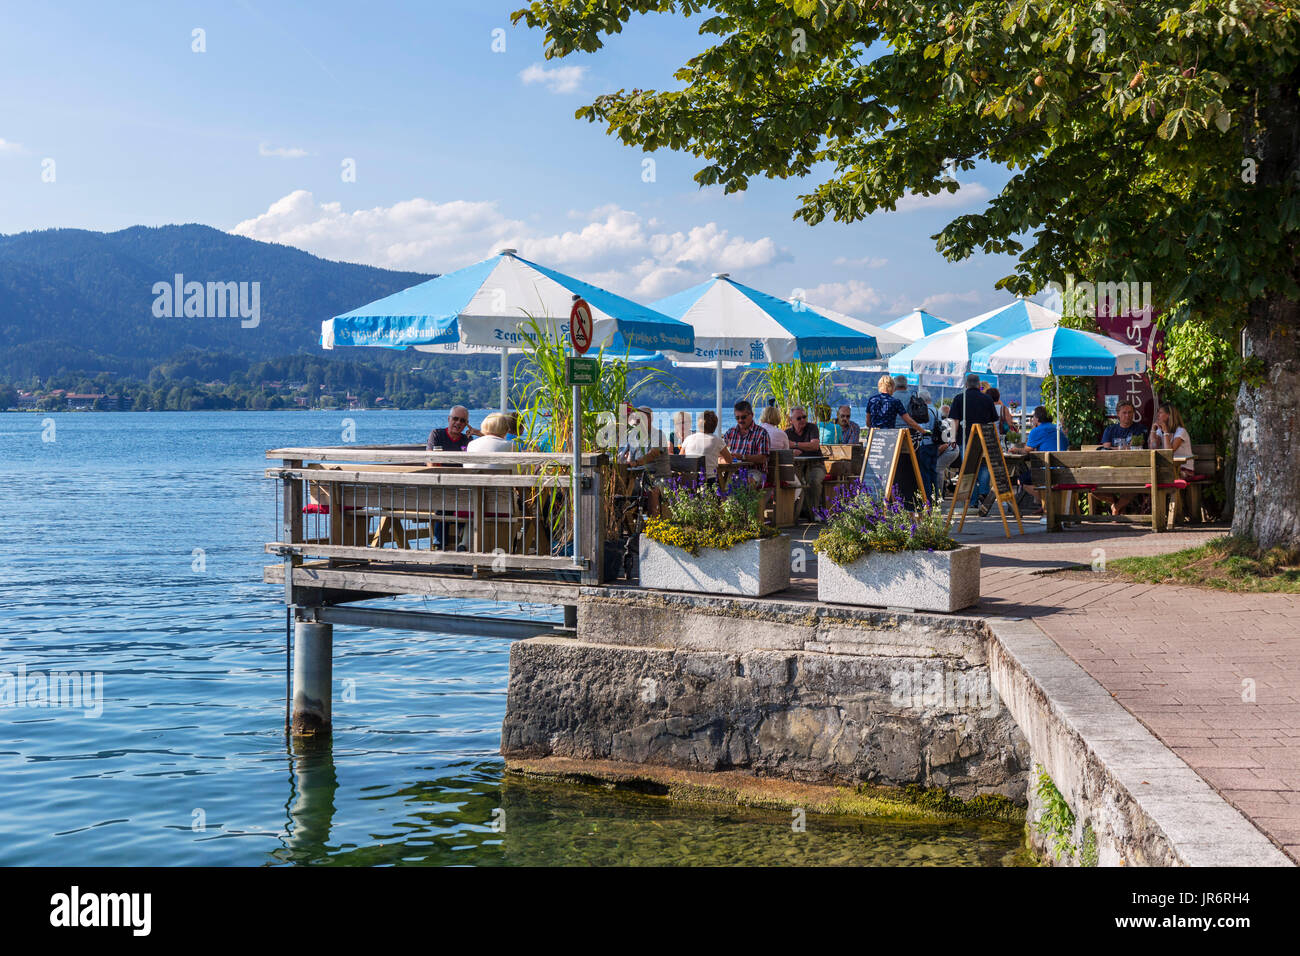 Cafe on the lakefront in Tegernsee, Lake Tegernsee, Bavaria, Germany Stock Photo